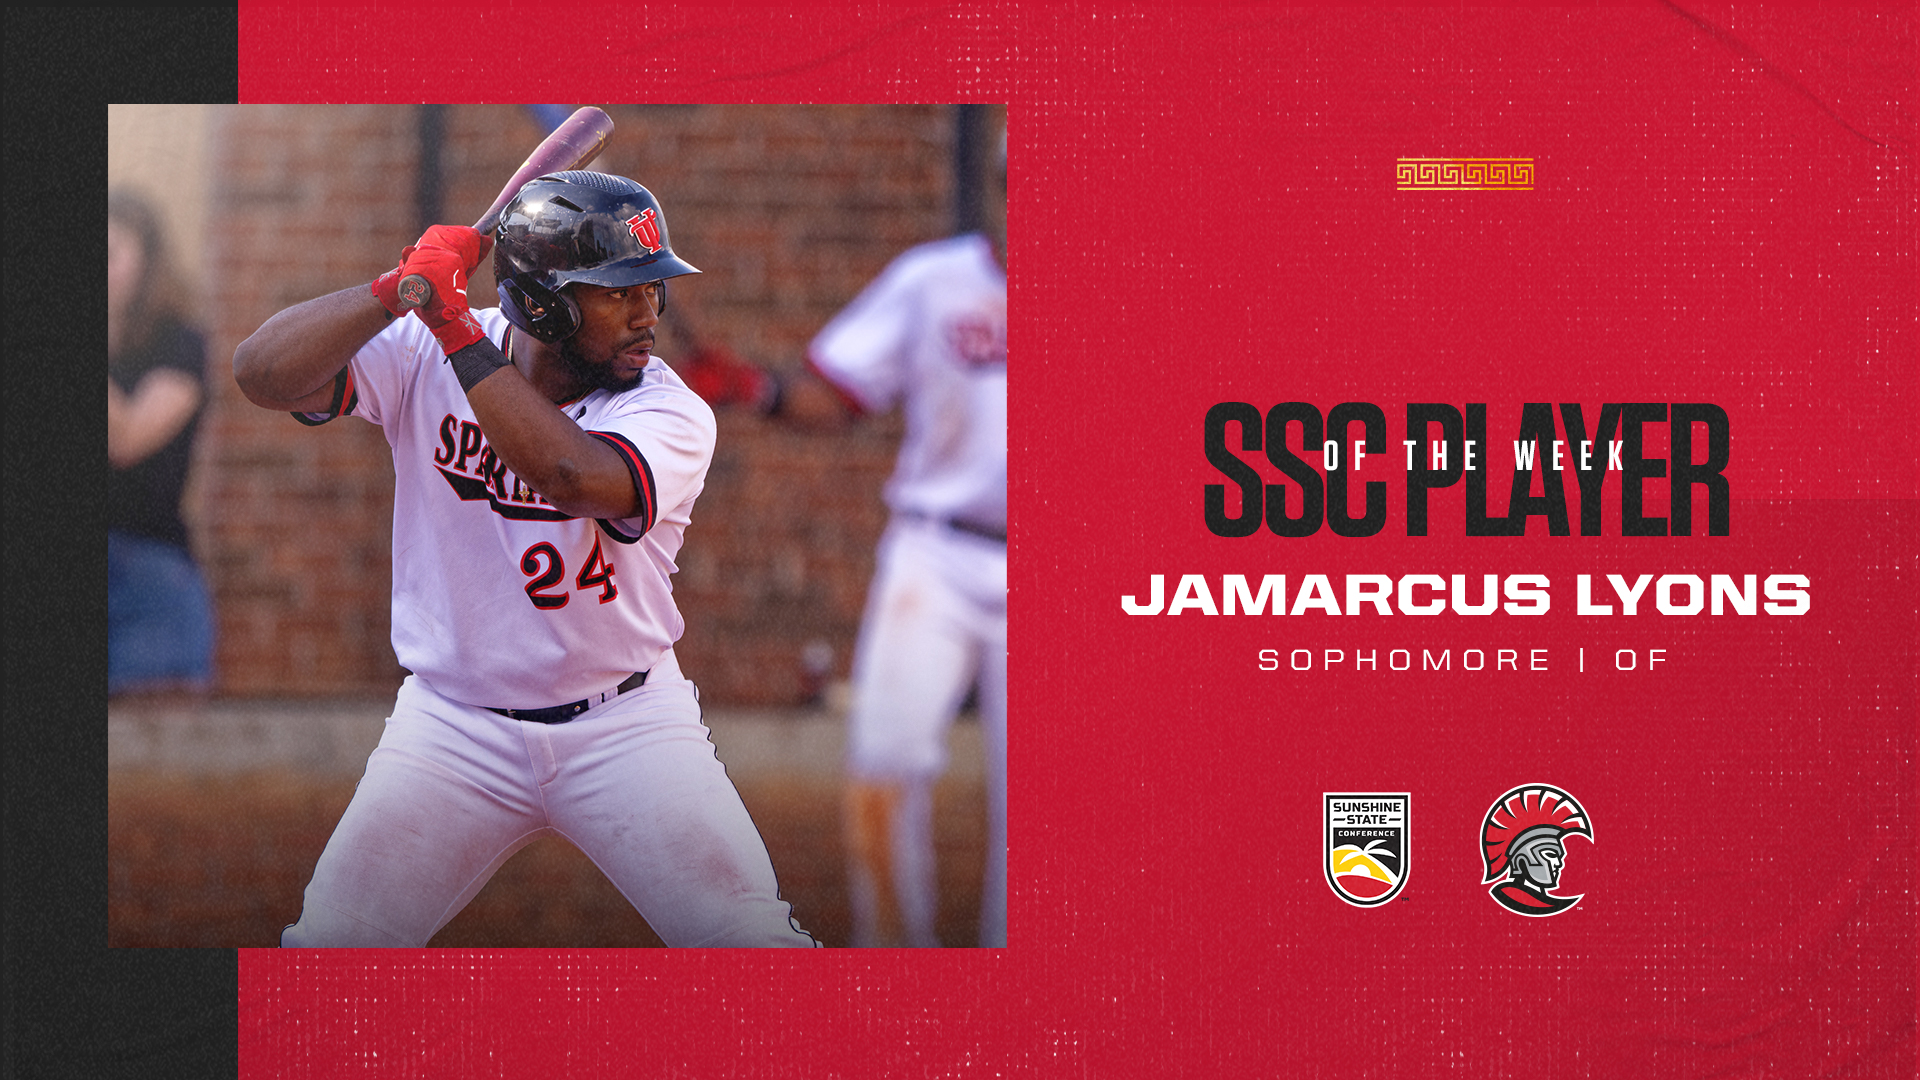 Jamarcus Lyons SSC Player of the Week